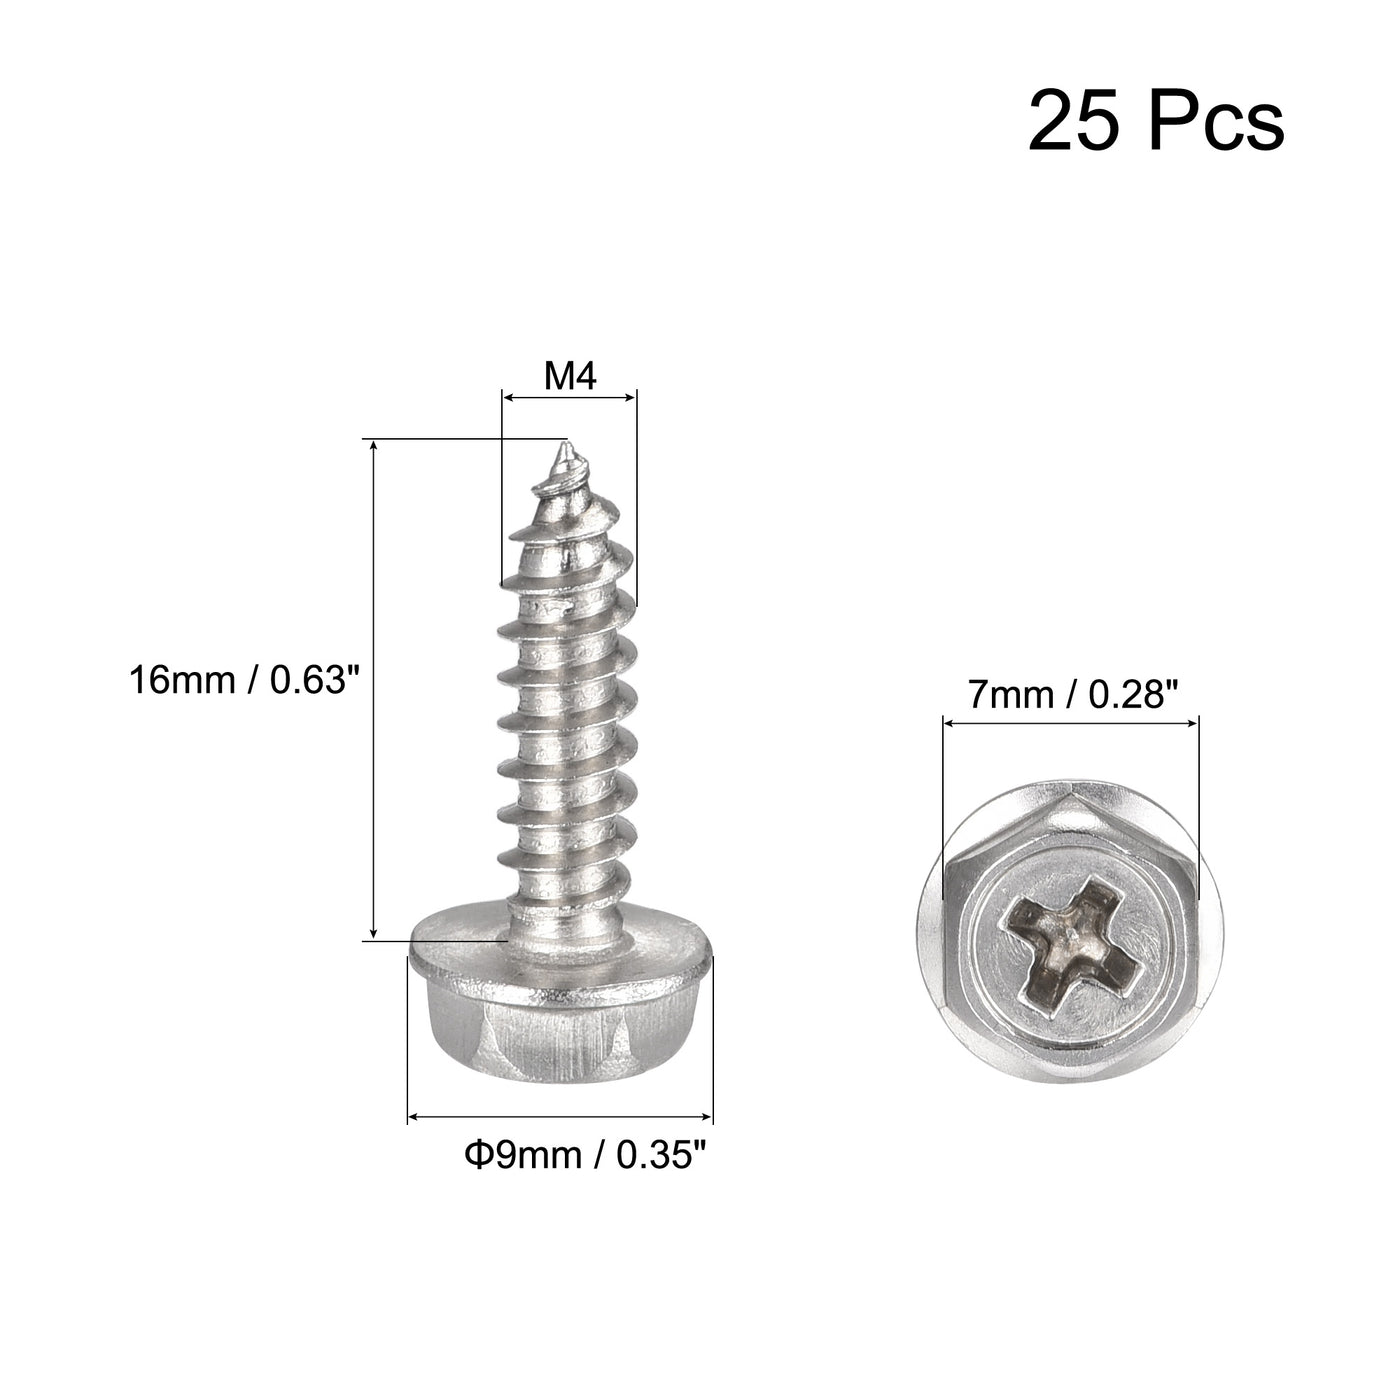 uxcell Uxcell Phillips Hex Washer Self Tapping Screws, M4 x 16mm 304 Stainless Steel Hex Flange Sheet Metal Screw 25pcs